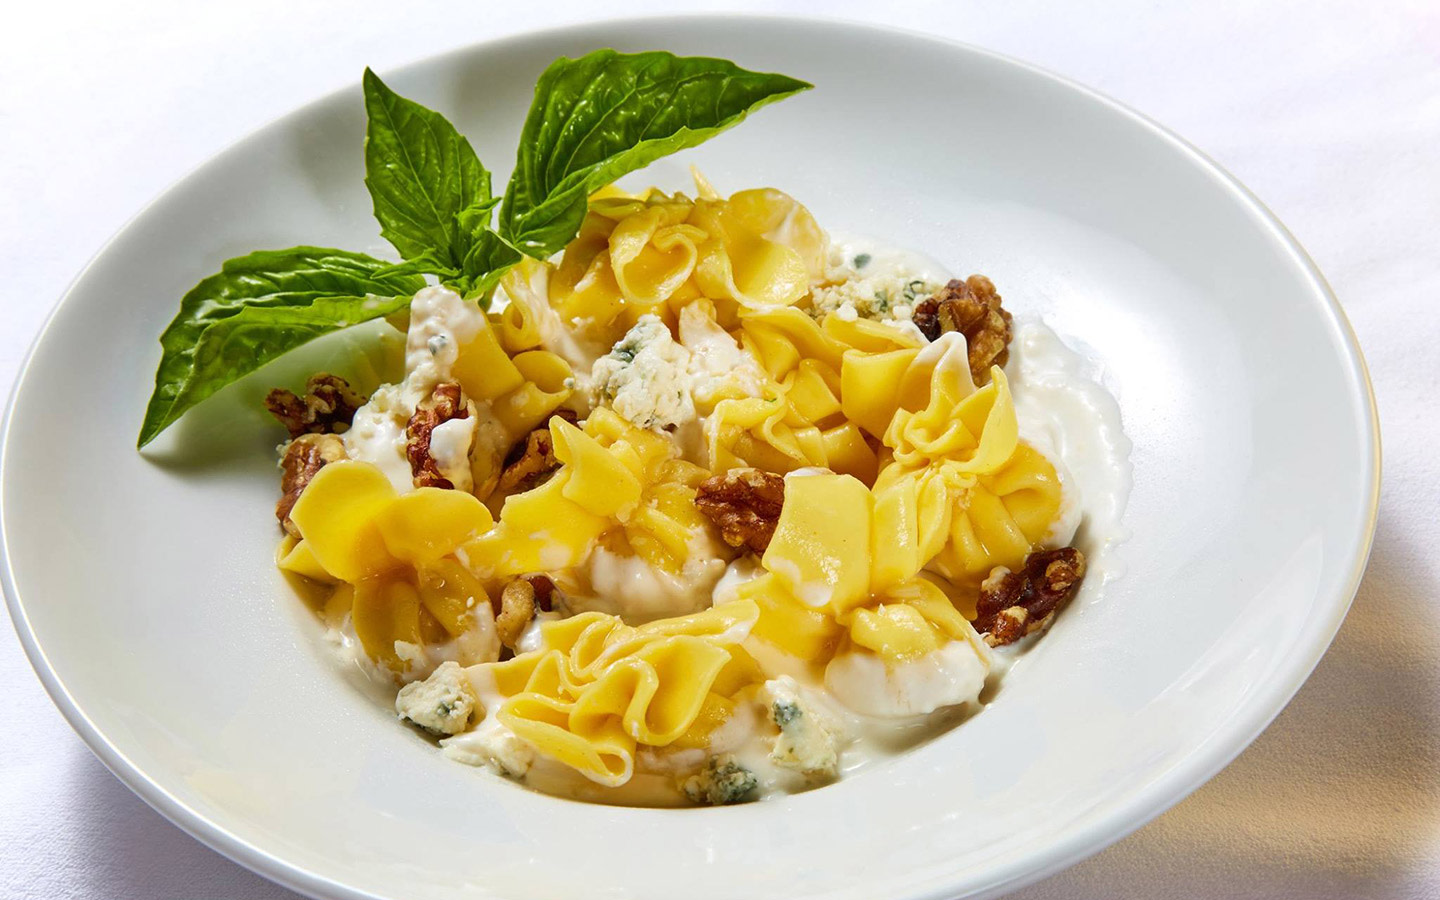 Perricone's Marketplace & Cafe - One of our signature dishes, Fiocchi  Gorgonzola. Purse-shaped pasta stuffed with fresh pear and four cheeses.  Served with a walnut Gorgonzola sauce. #perriconesclassics #theroads  #brickell | Facebook